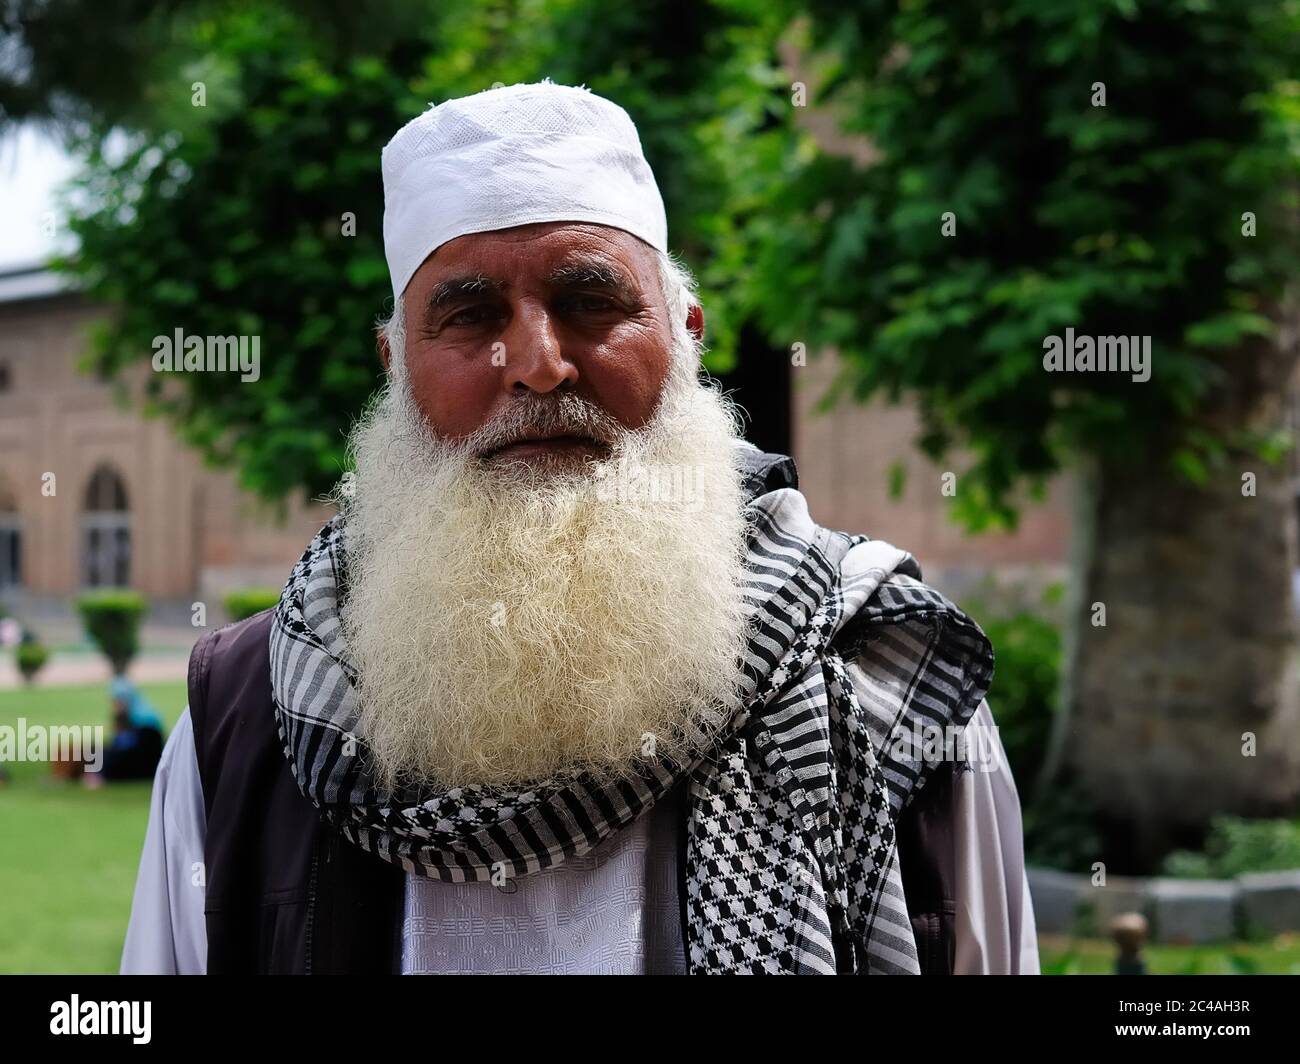 Srinagar, India - JUNE 20: portrait old man with long white beard wearing  the traditional scarf and the hat in mosque on June 20, 2017 Stock Photo -  Alamy